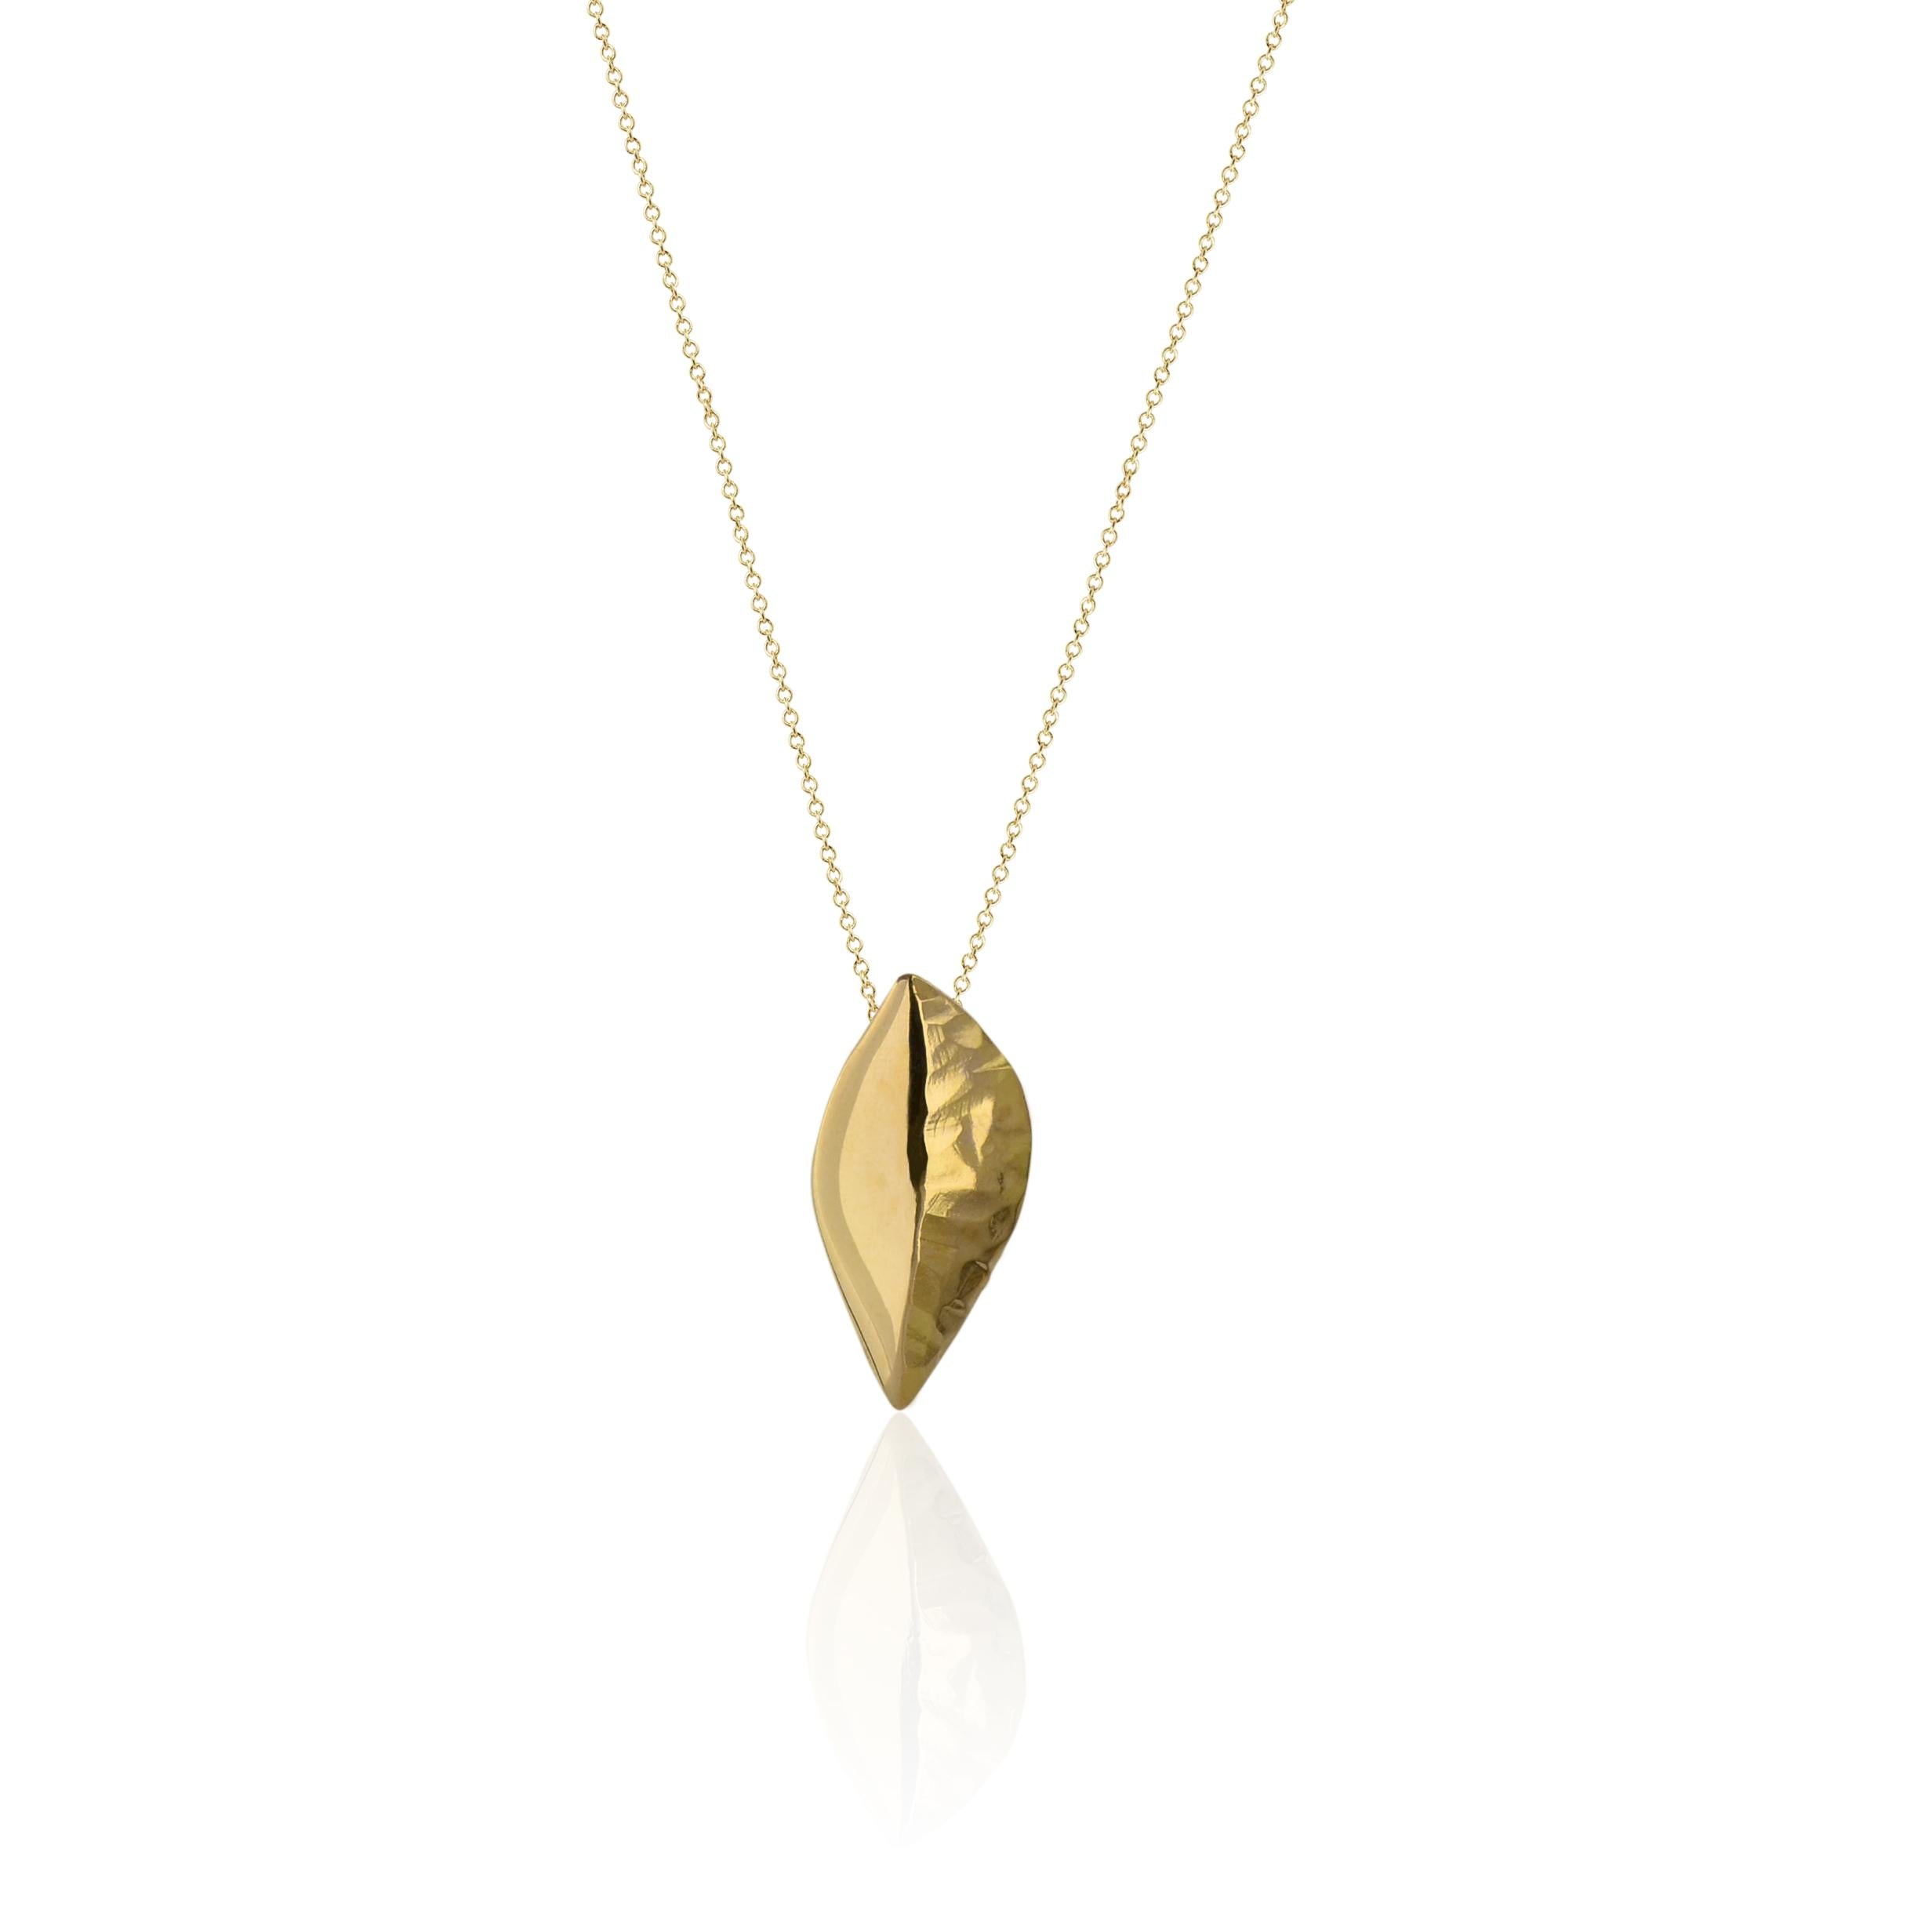 Inspired by the gentle sensual curves of leaves, the Leaf Pendant, crafted in 18kt Certified FAIRMINED Yellow Gold tells its own story of 'Less is More' when it comes to beauty and sophistication. 
Minimalism and functionality blend with Susan’s